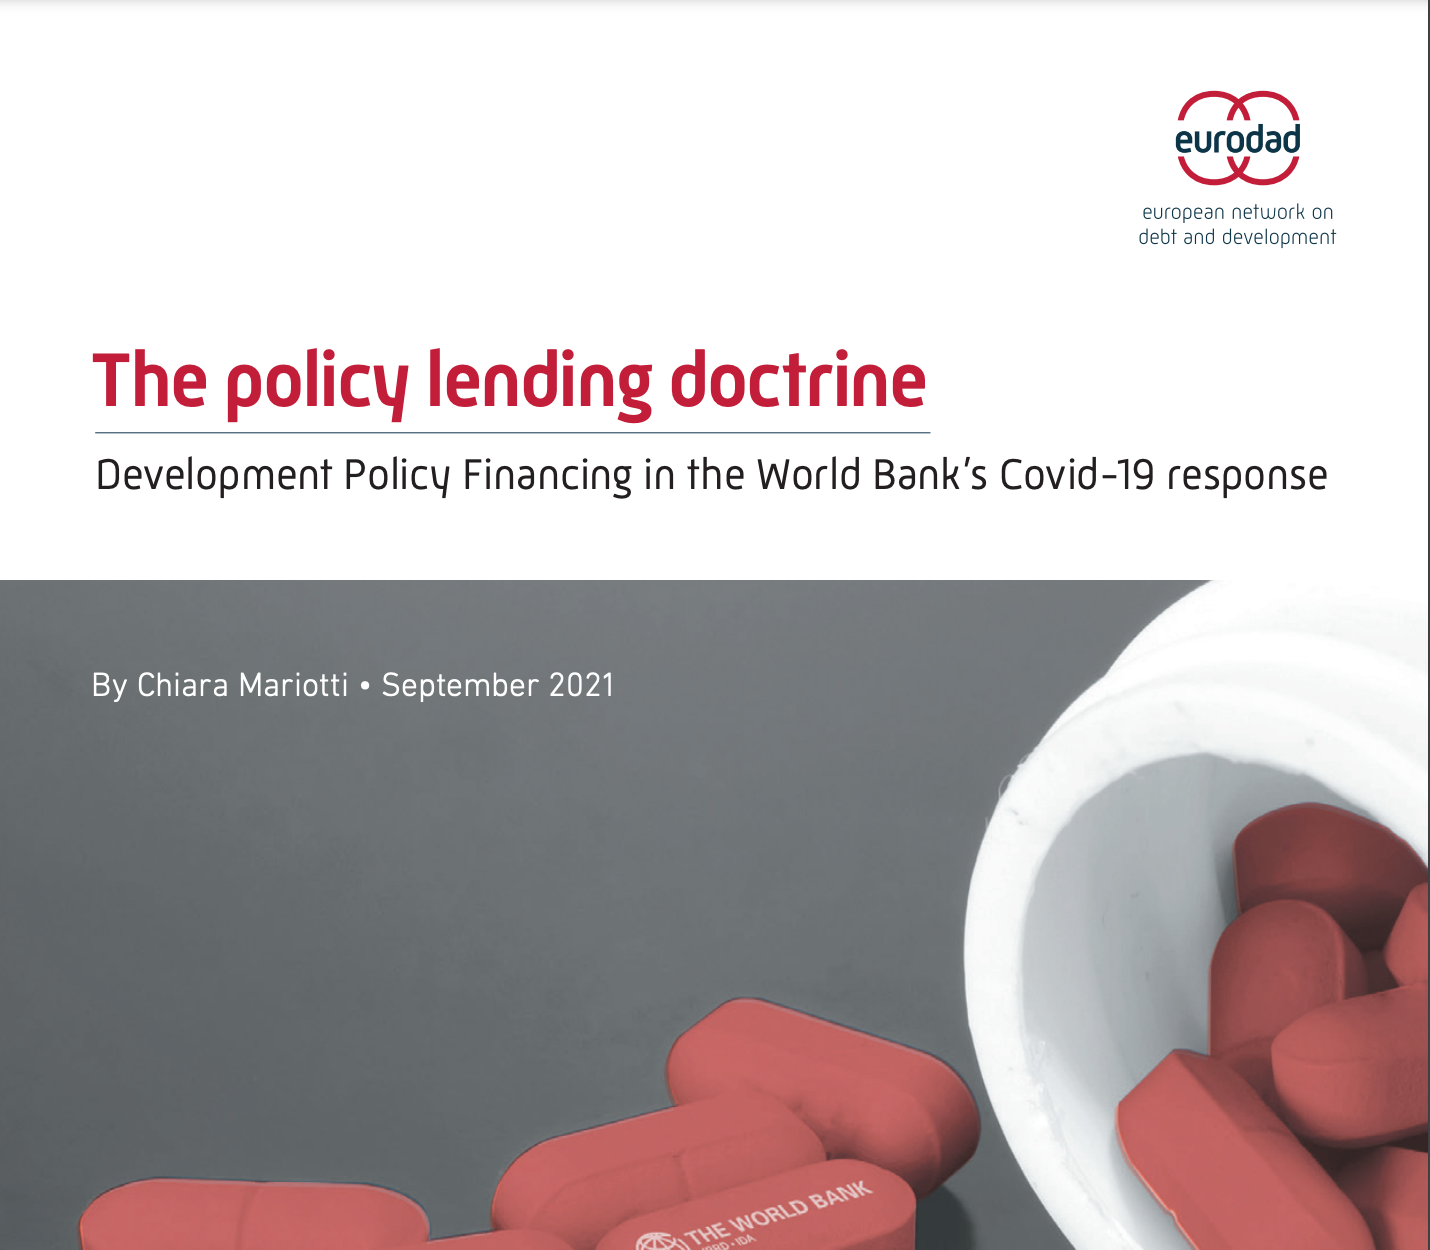 Euro dad report on the policy lending doctrine